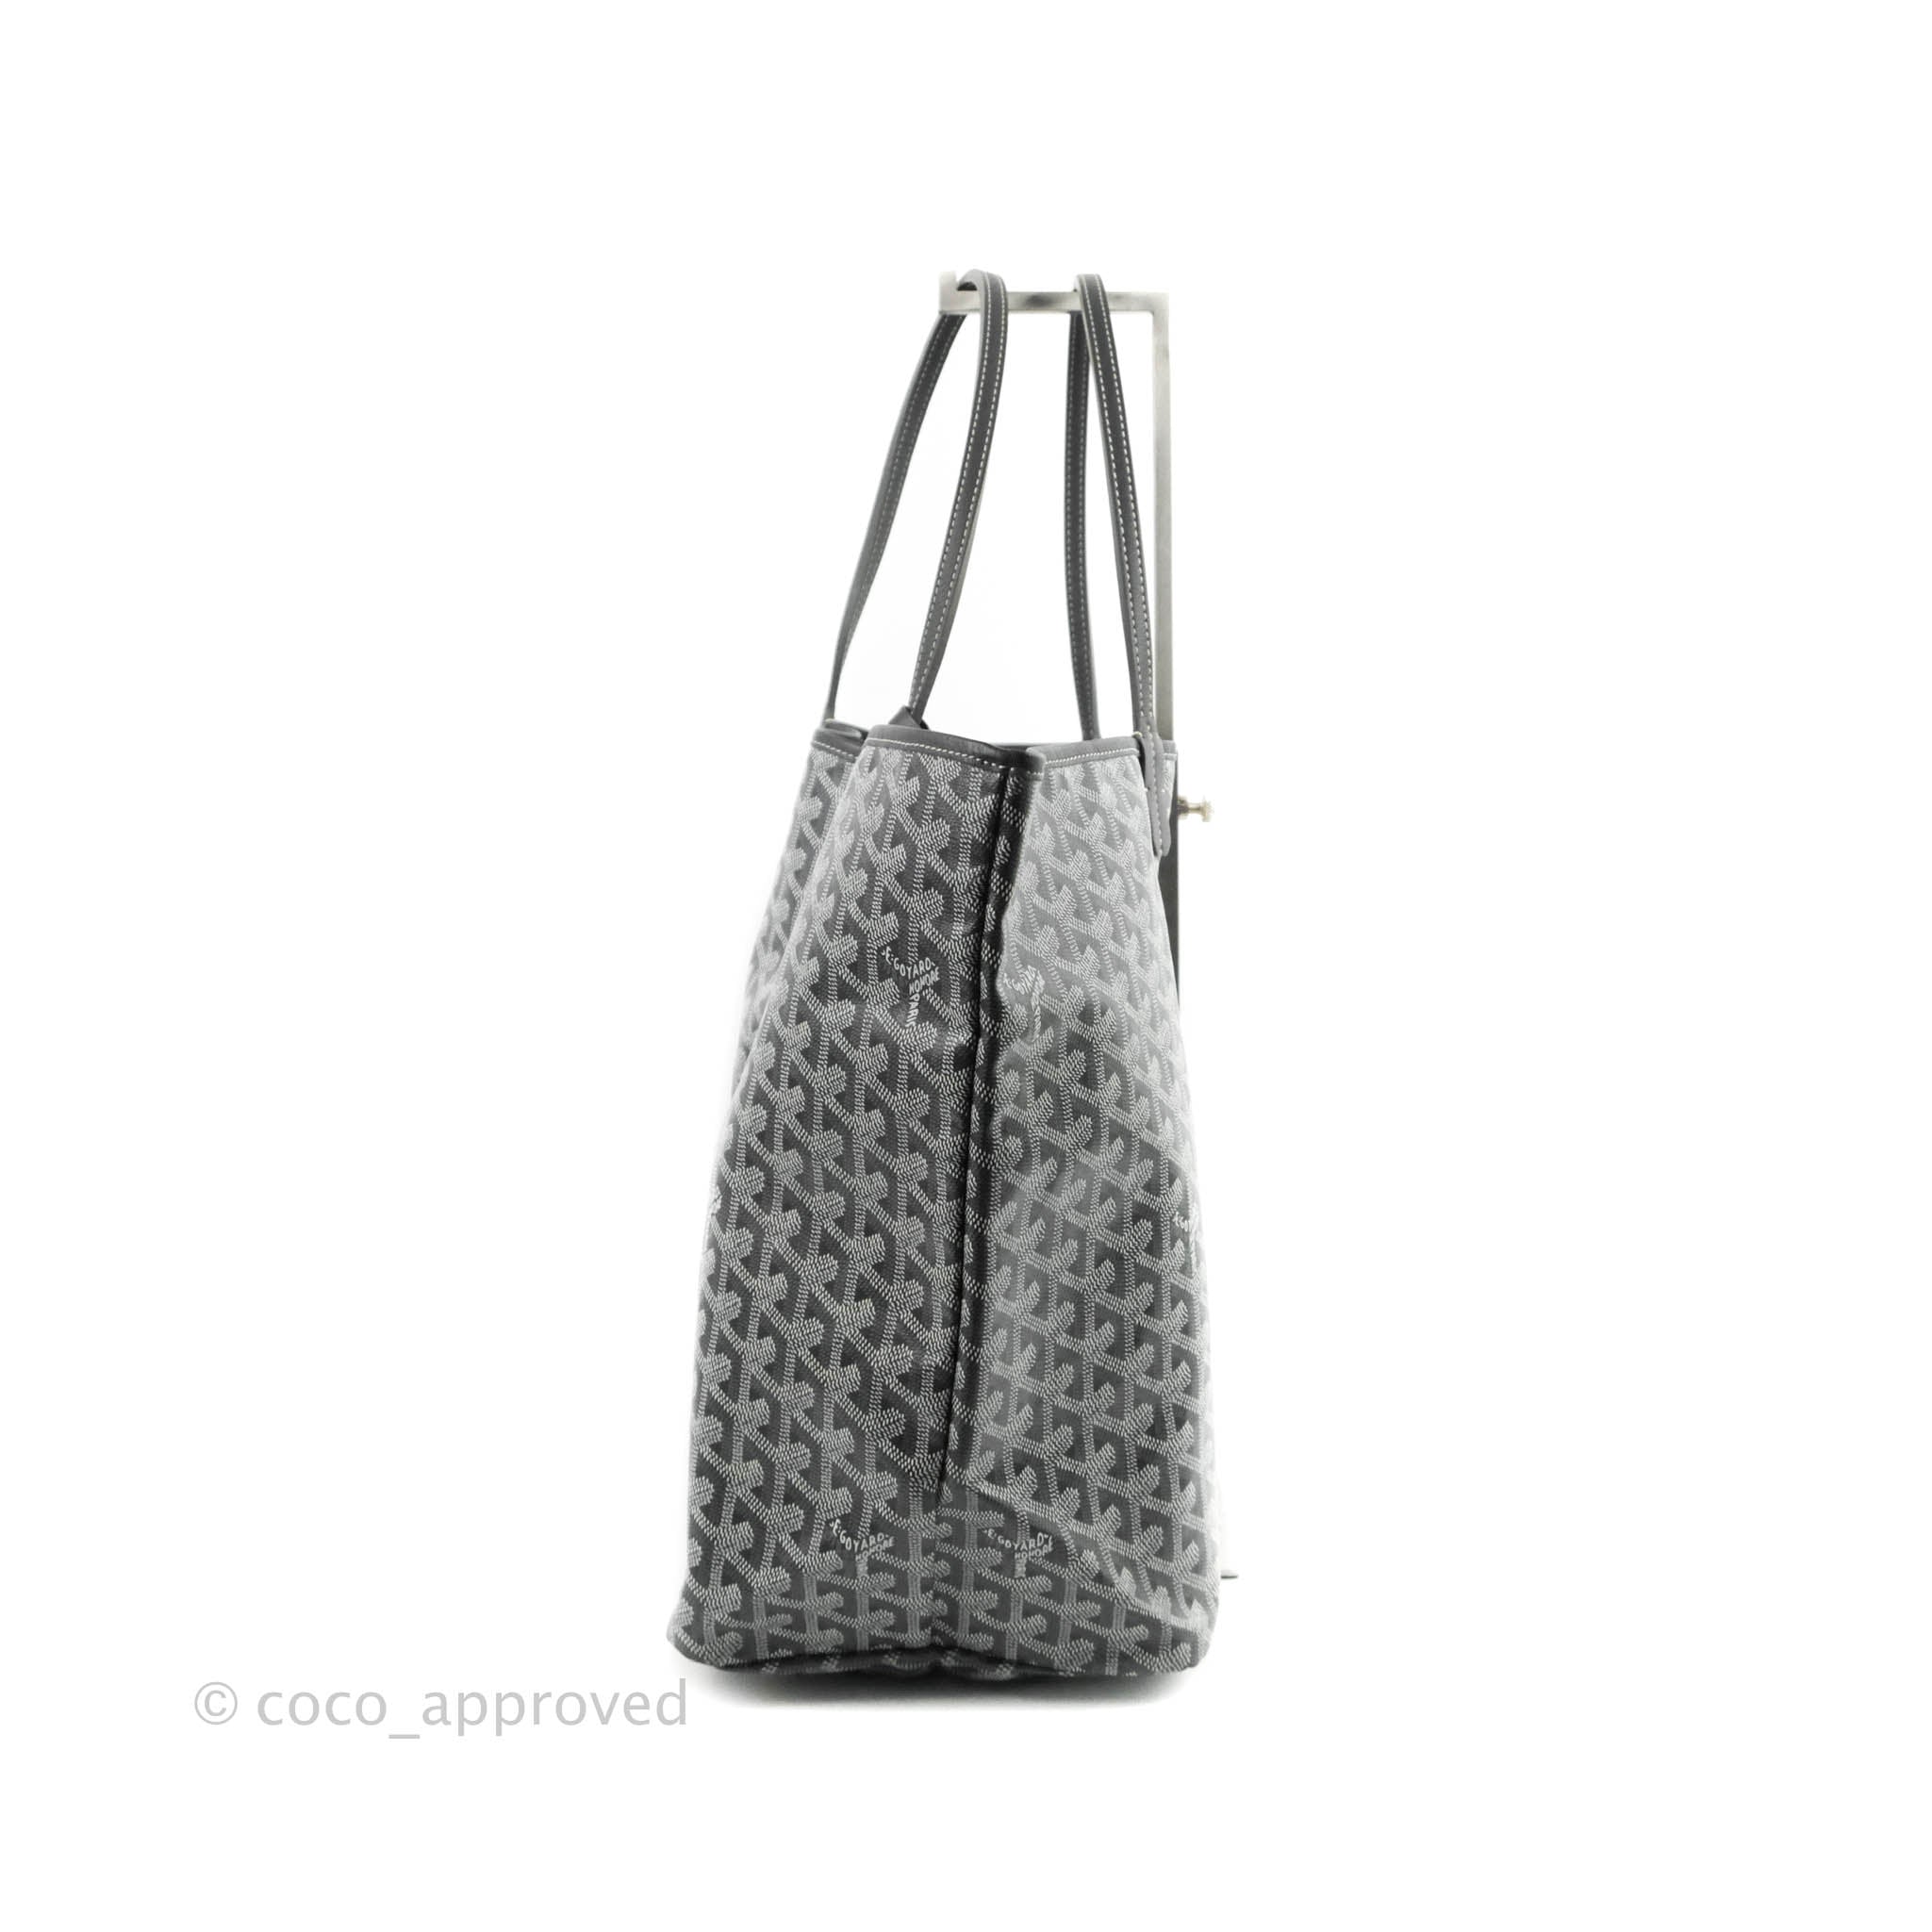 The Coveted Goyard Saint-Louis GM Tote bag in grey and white